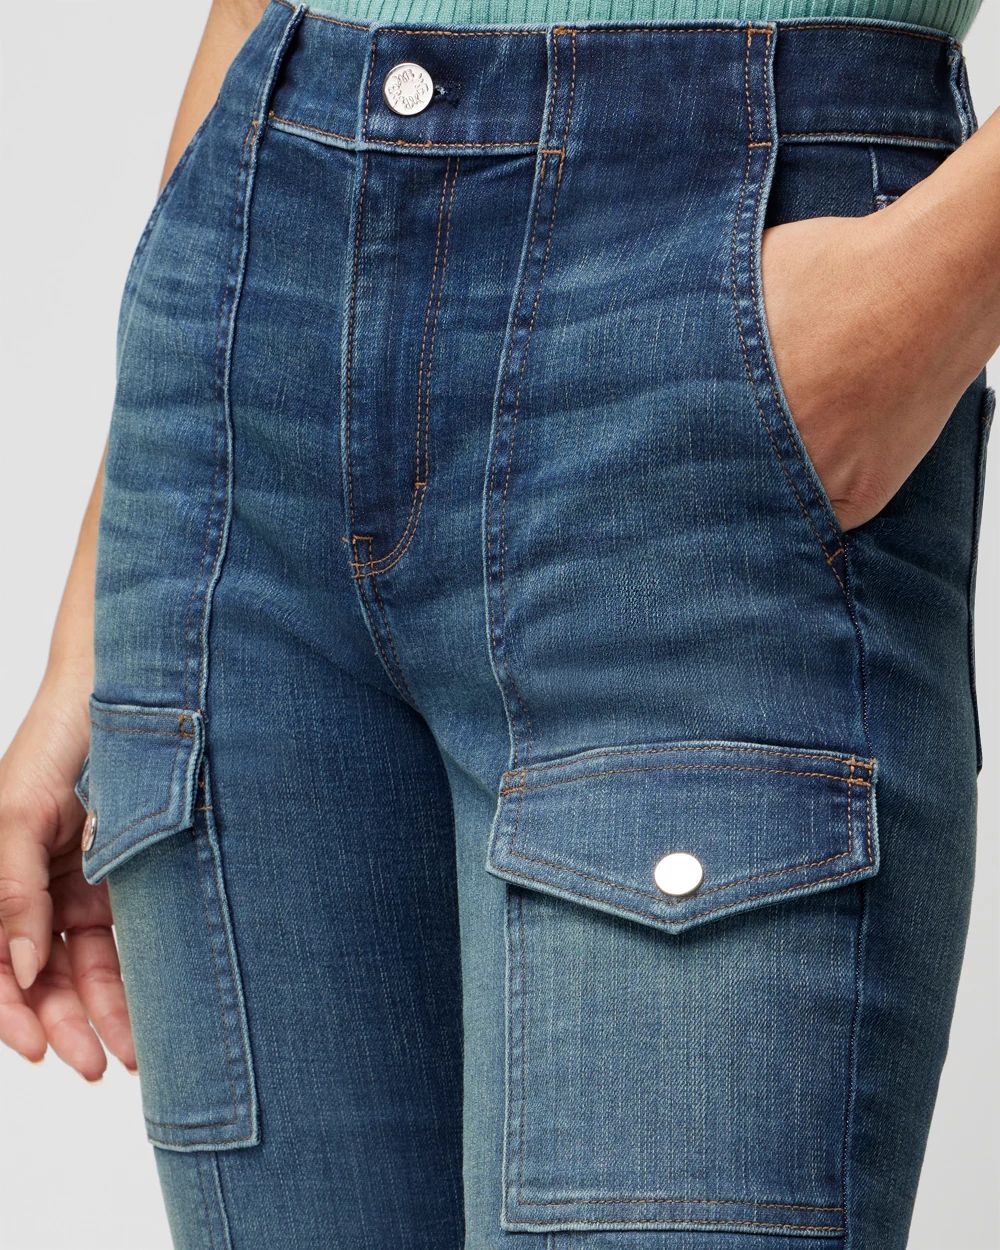 High-Rise Everyday Soft Denim  Cargo Skinny Flare Jeans click to view larger image.